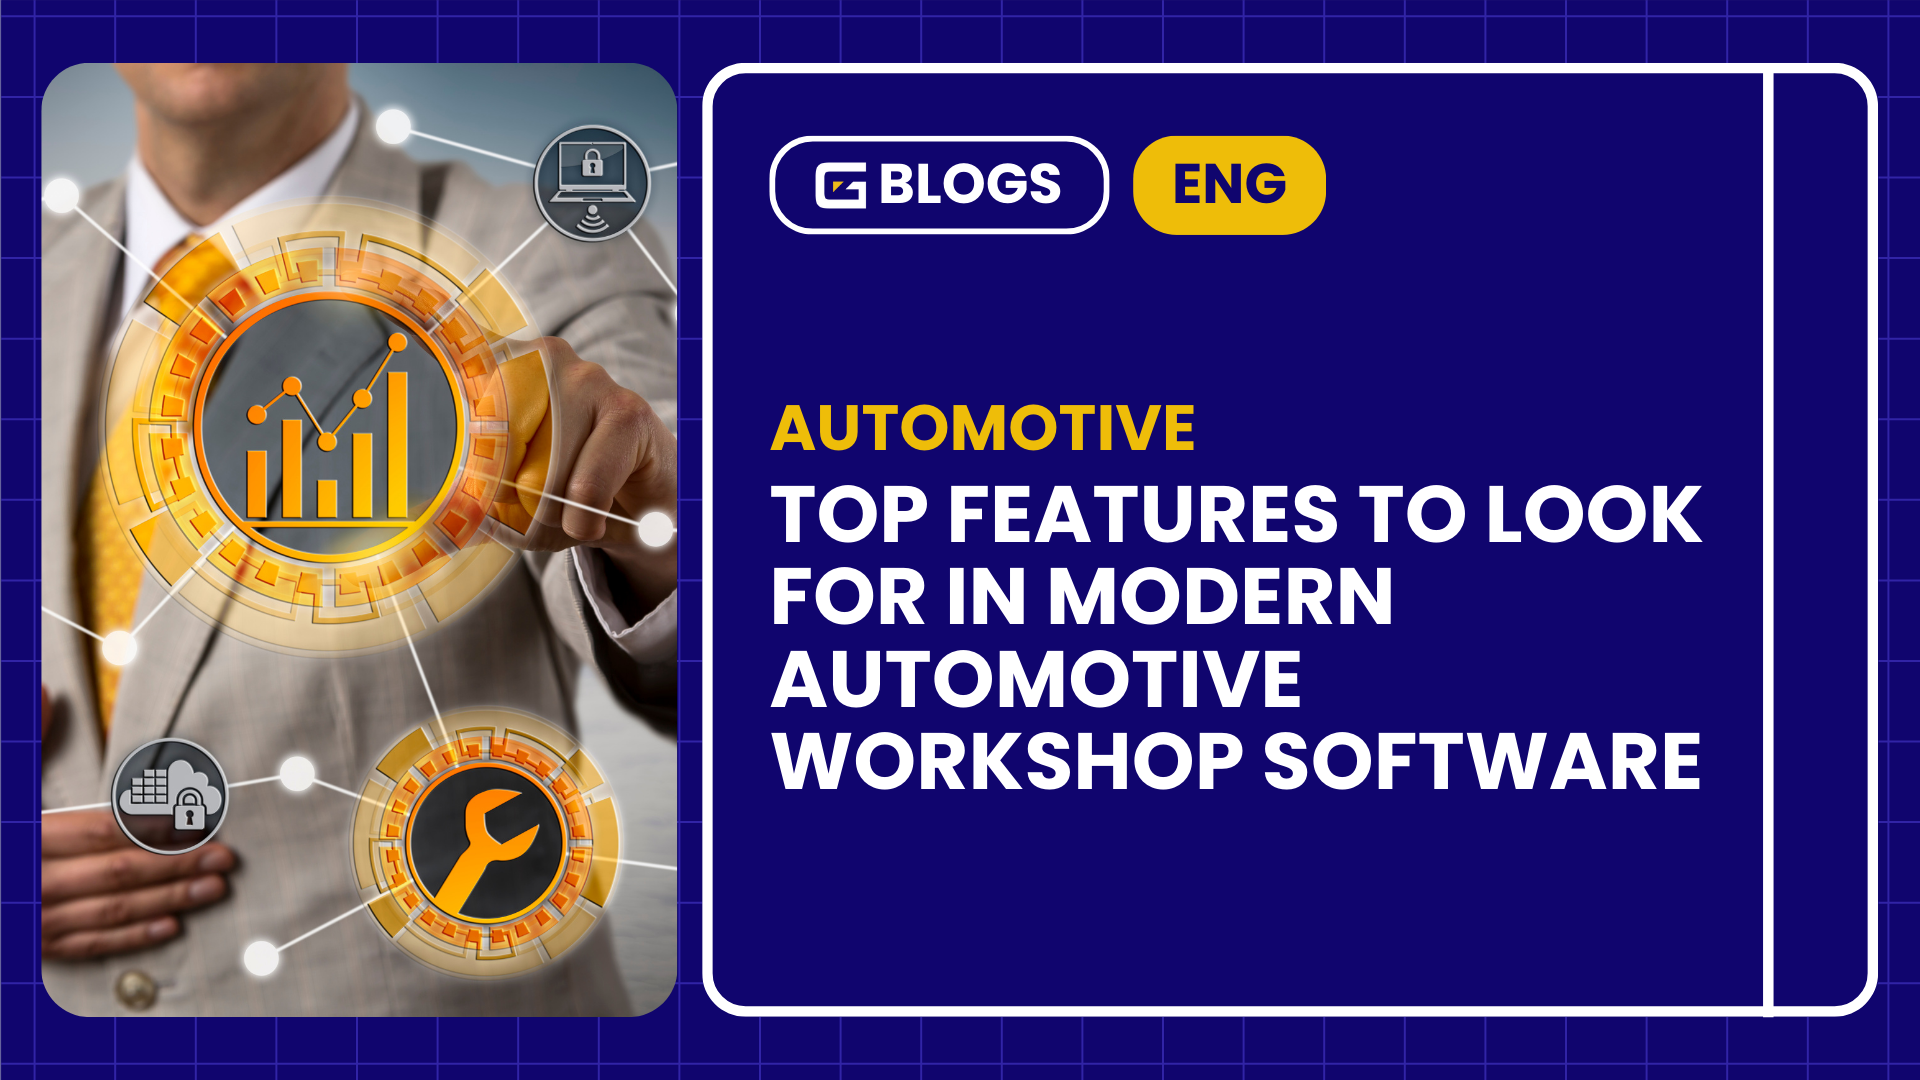 Top Features to Look for in Modern Automotive Workshop Software